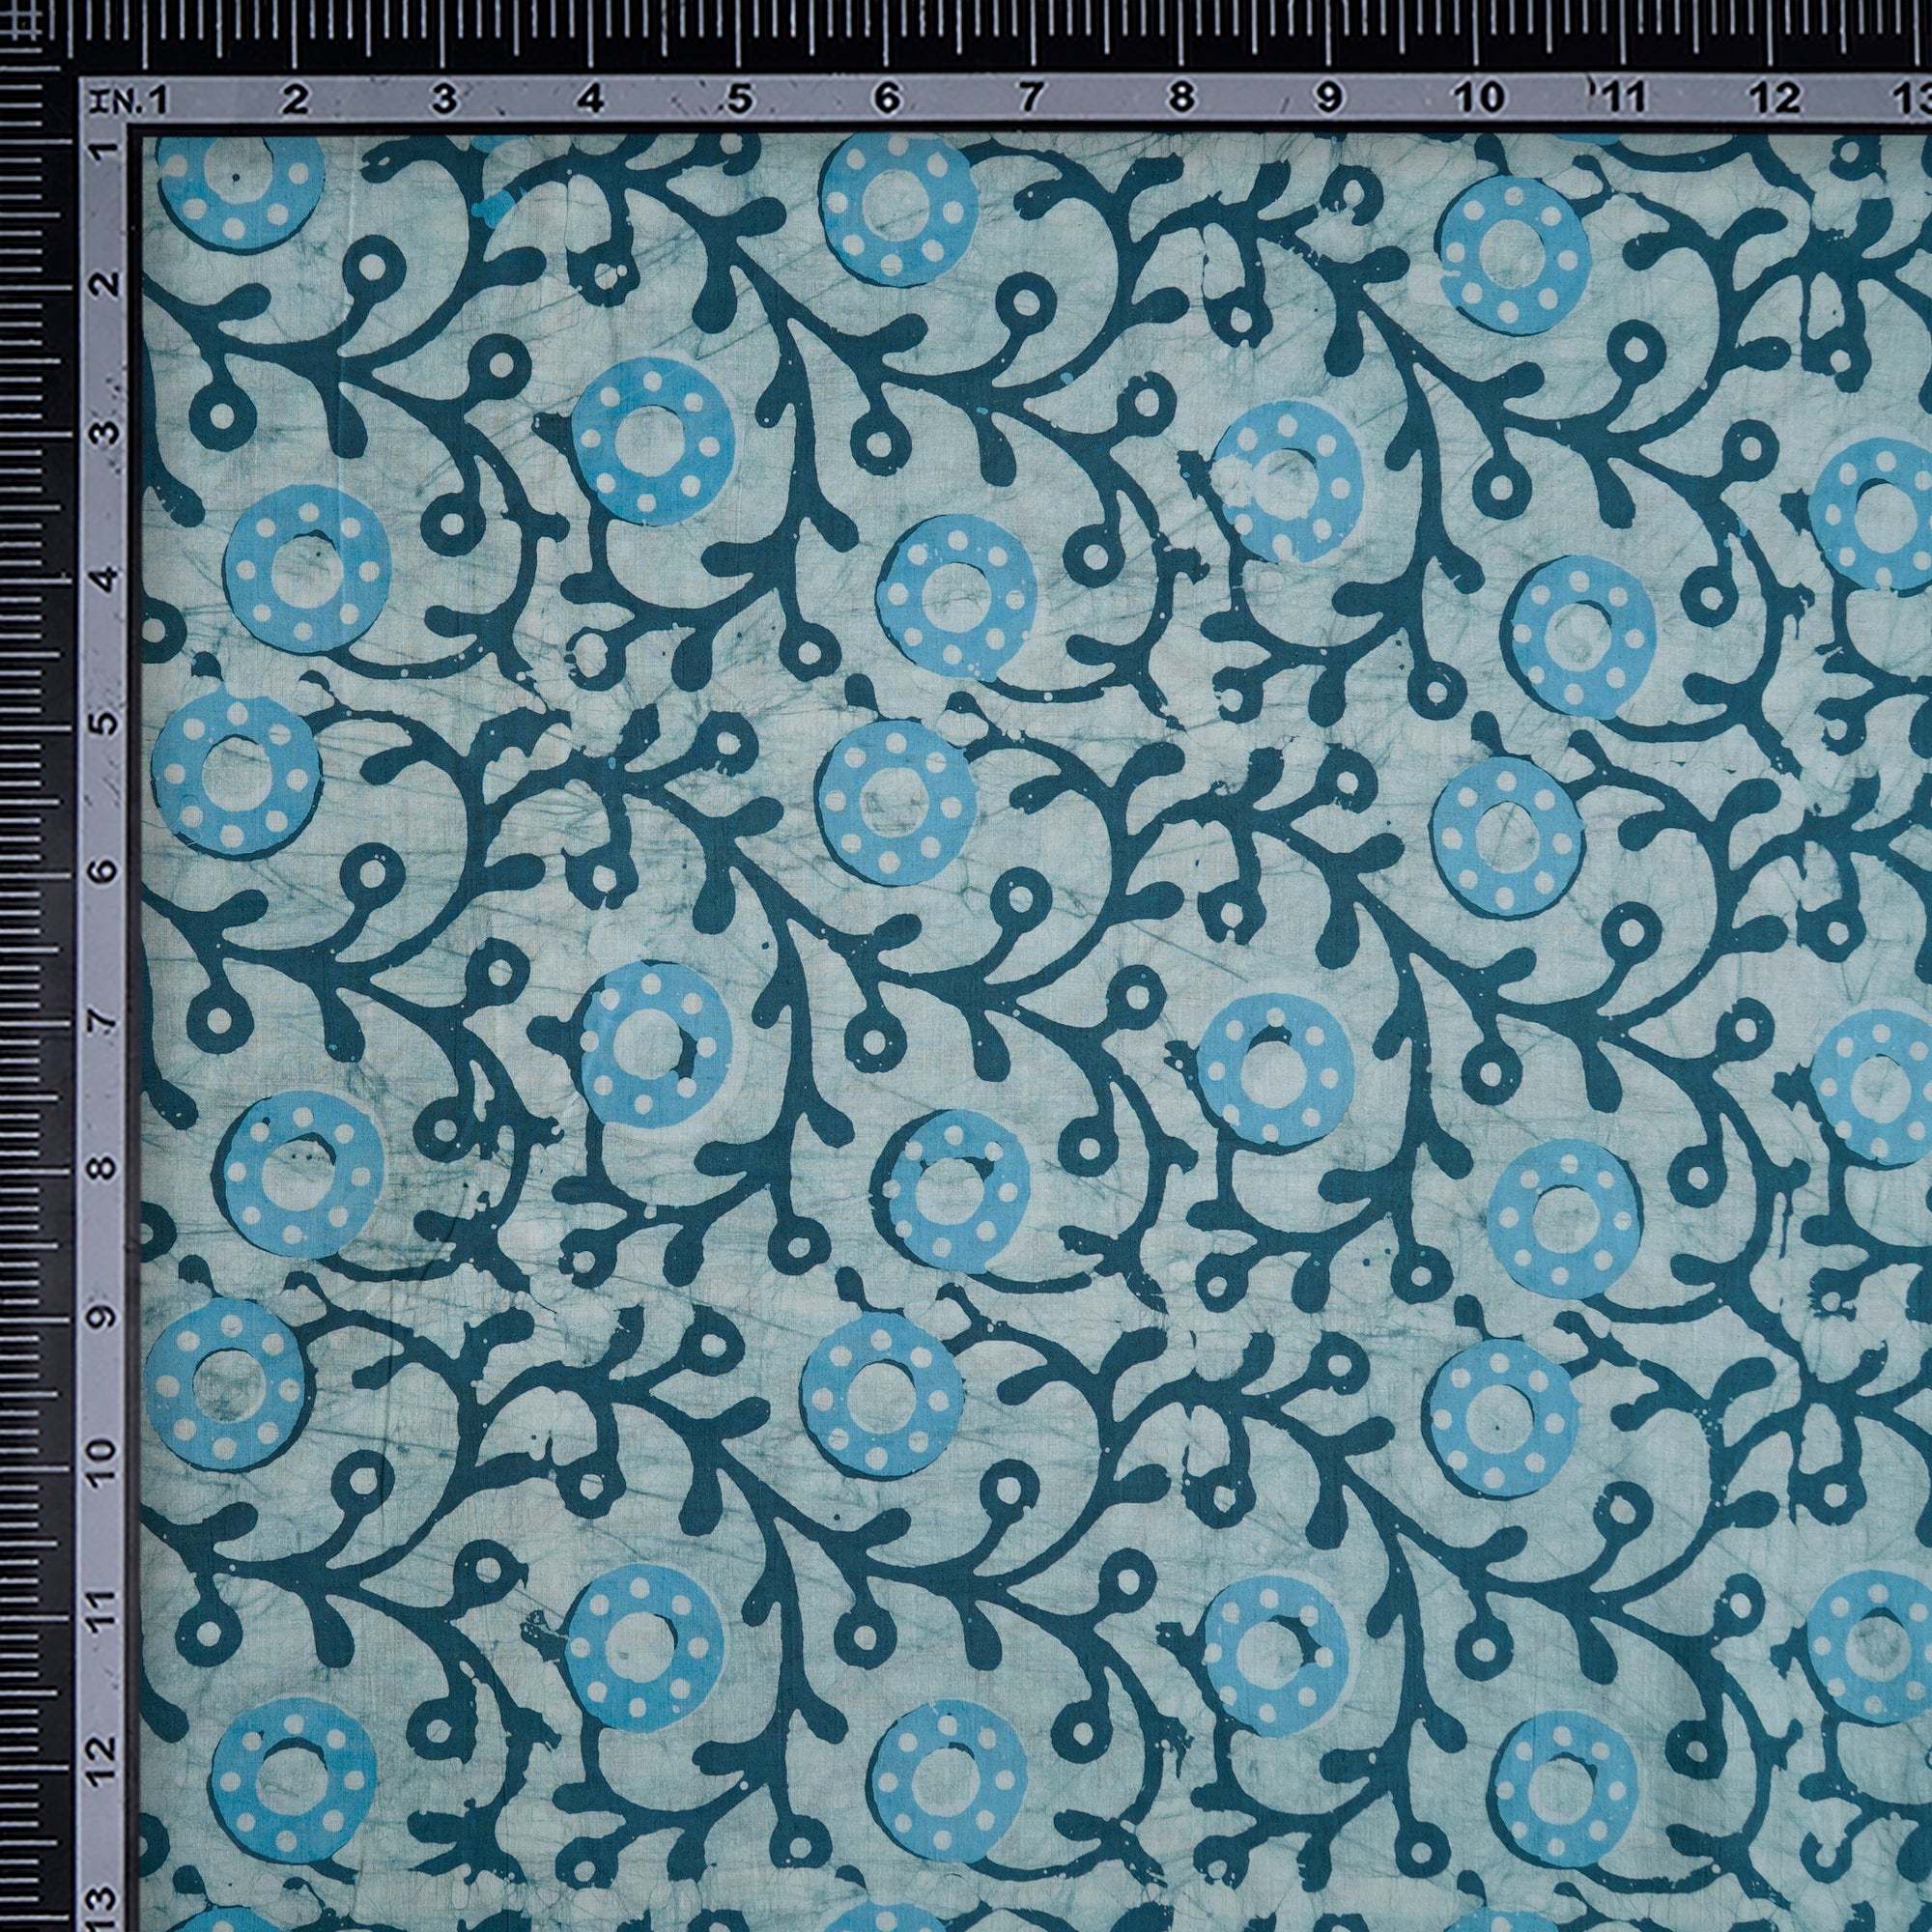 Sky Blue Handcrafted Waxed Batik Printed Cotton Fabric